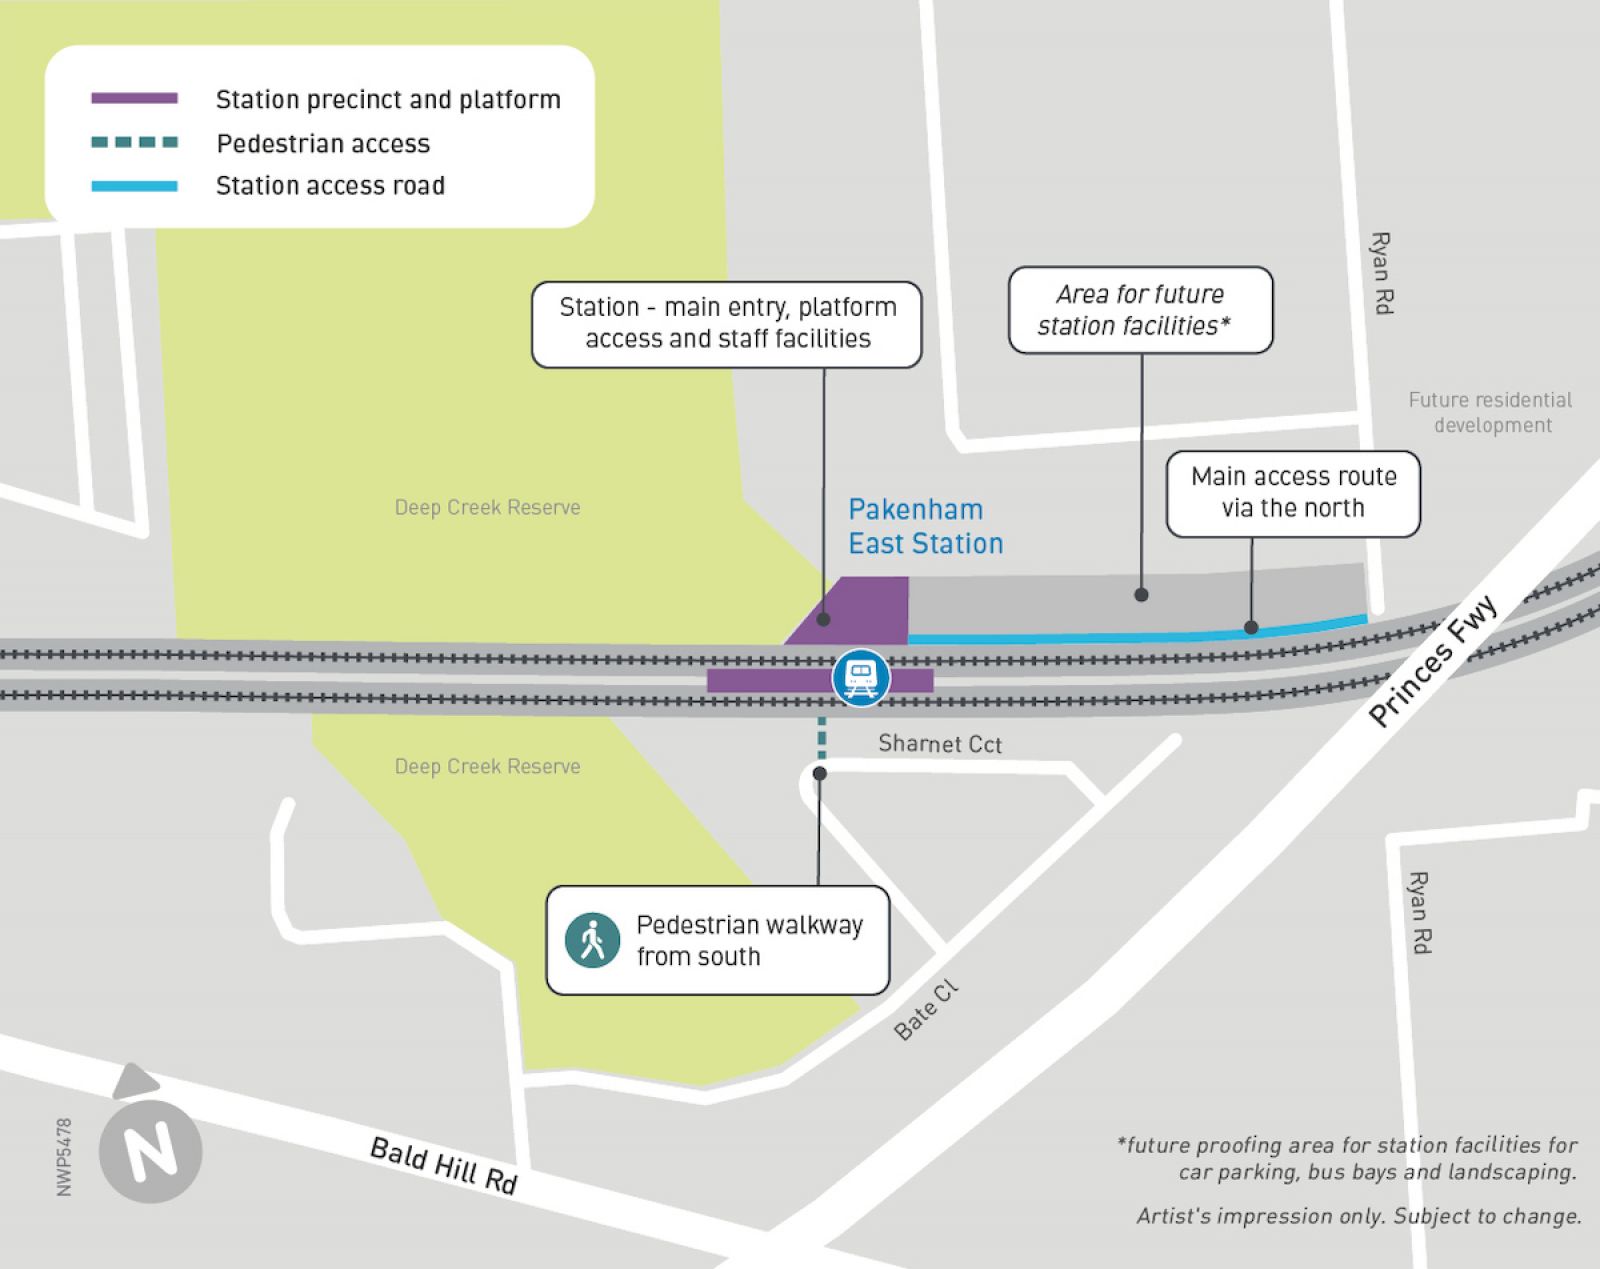 Map of where the new Pakenham East station will be located. Between Deep Creek and the Princes Freeway